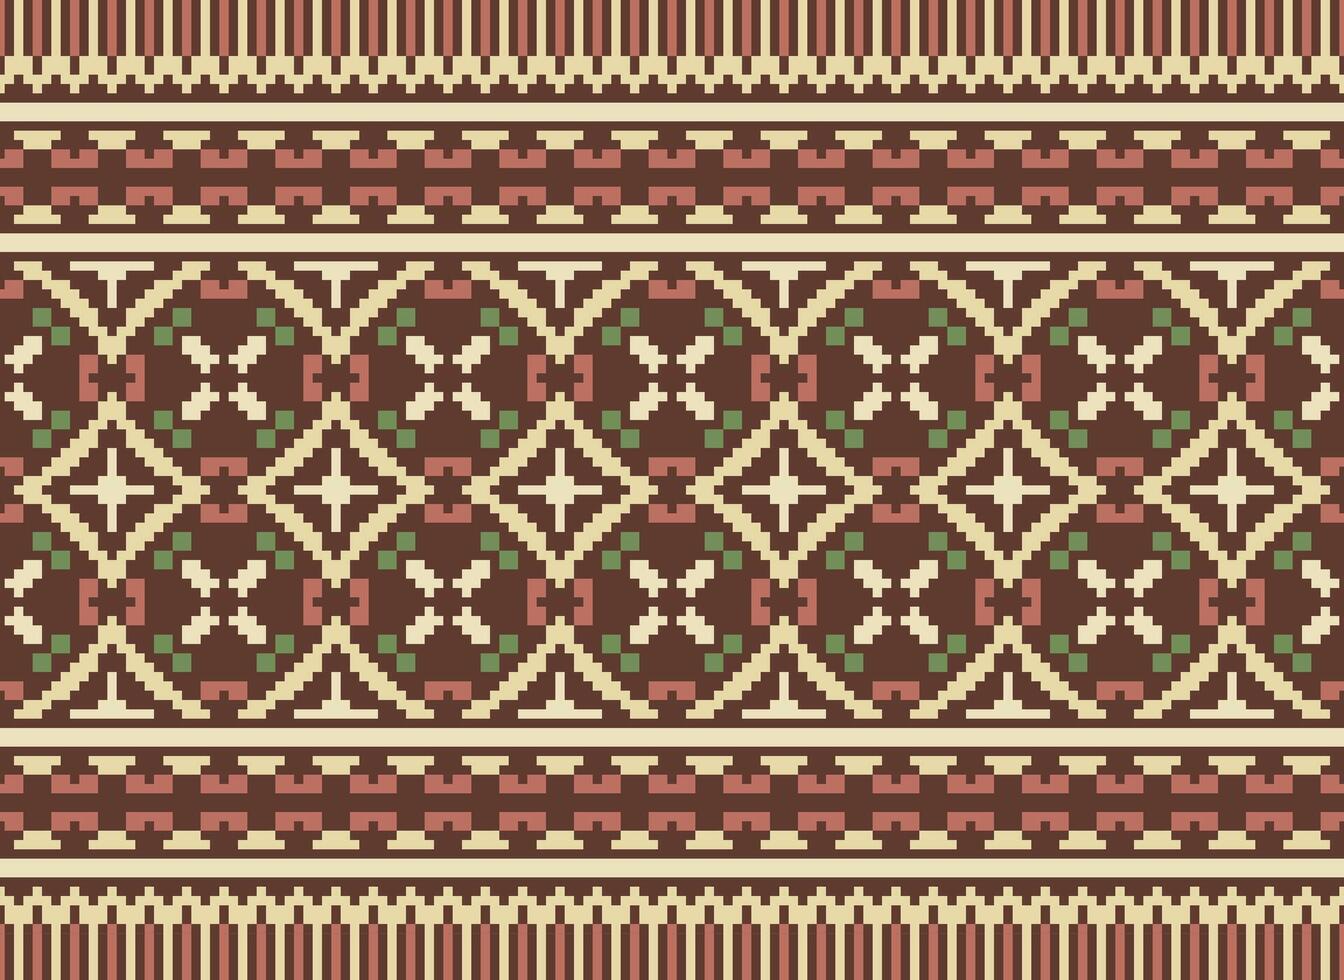 Cross Stitch and Pixel Ethnic Patterns Bring Vibrant Style to Fabrics, Sarees, and Ikat Designs, Red color cross stitch. Traditional Design. vector